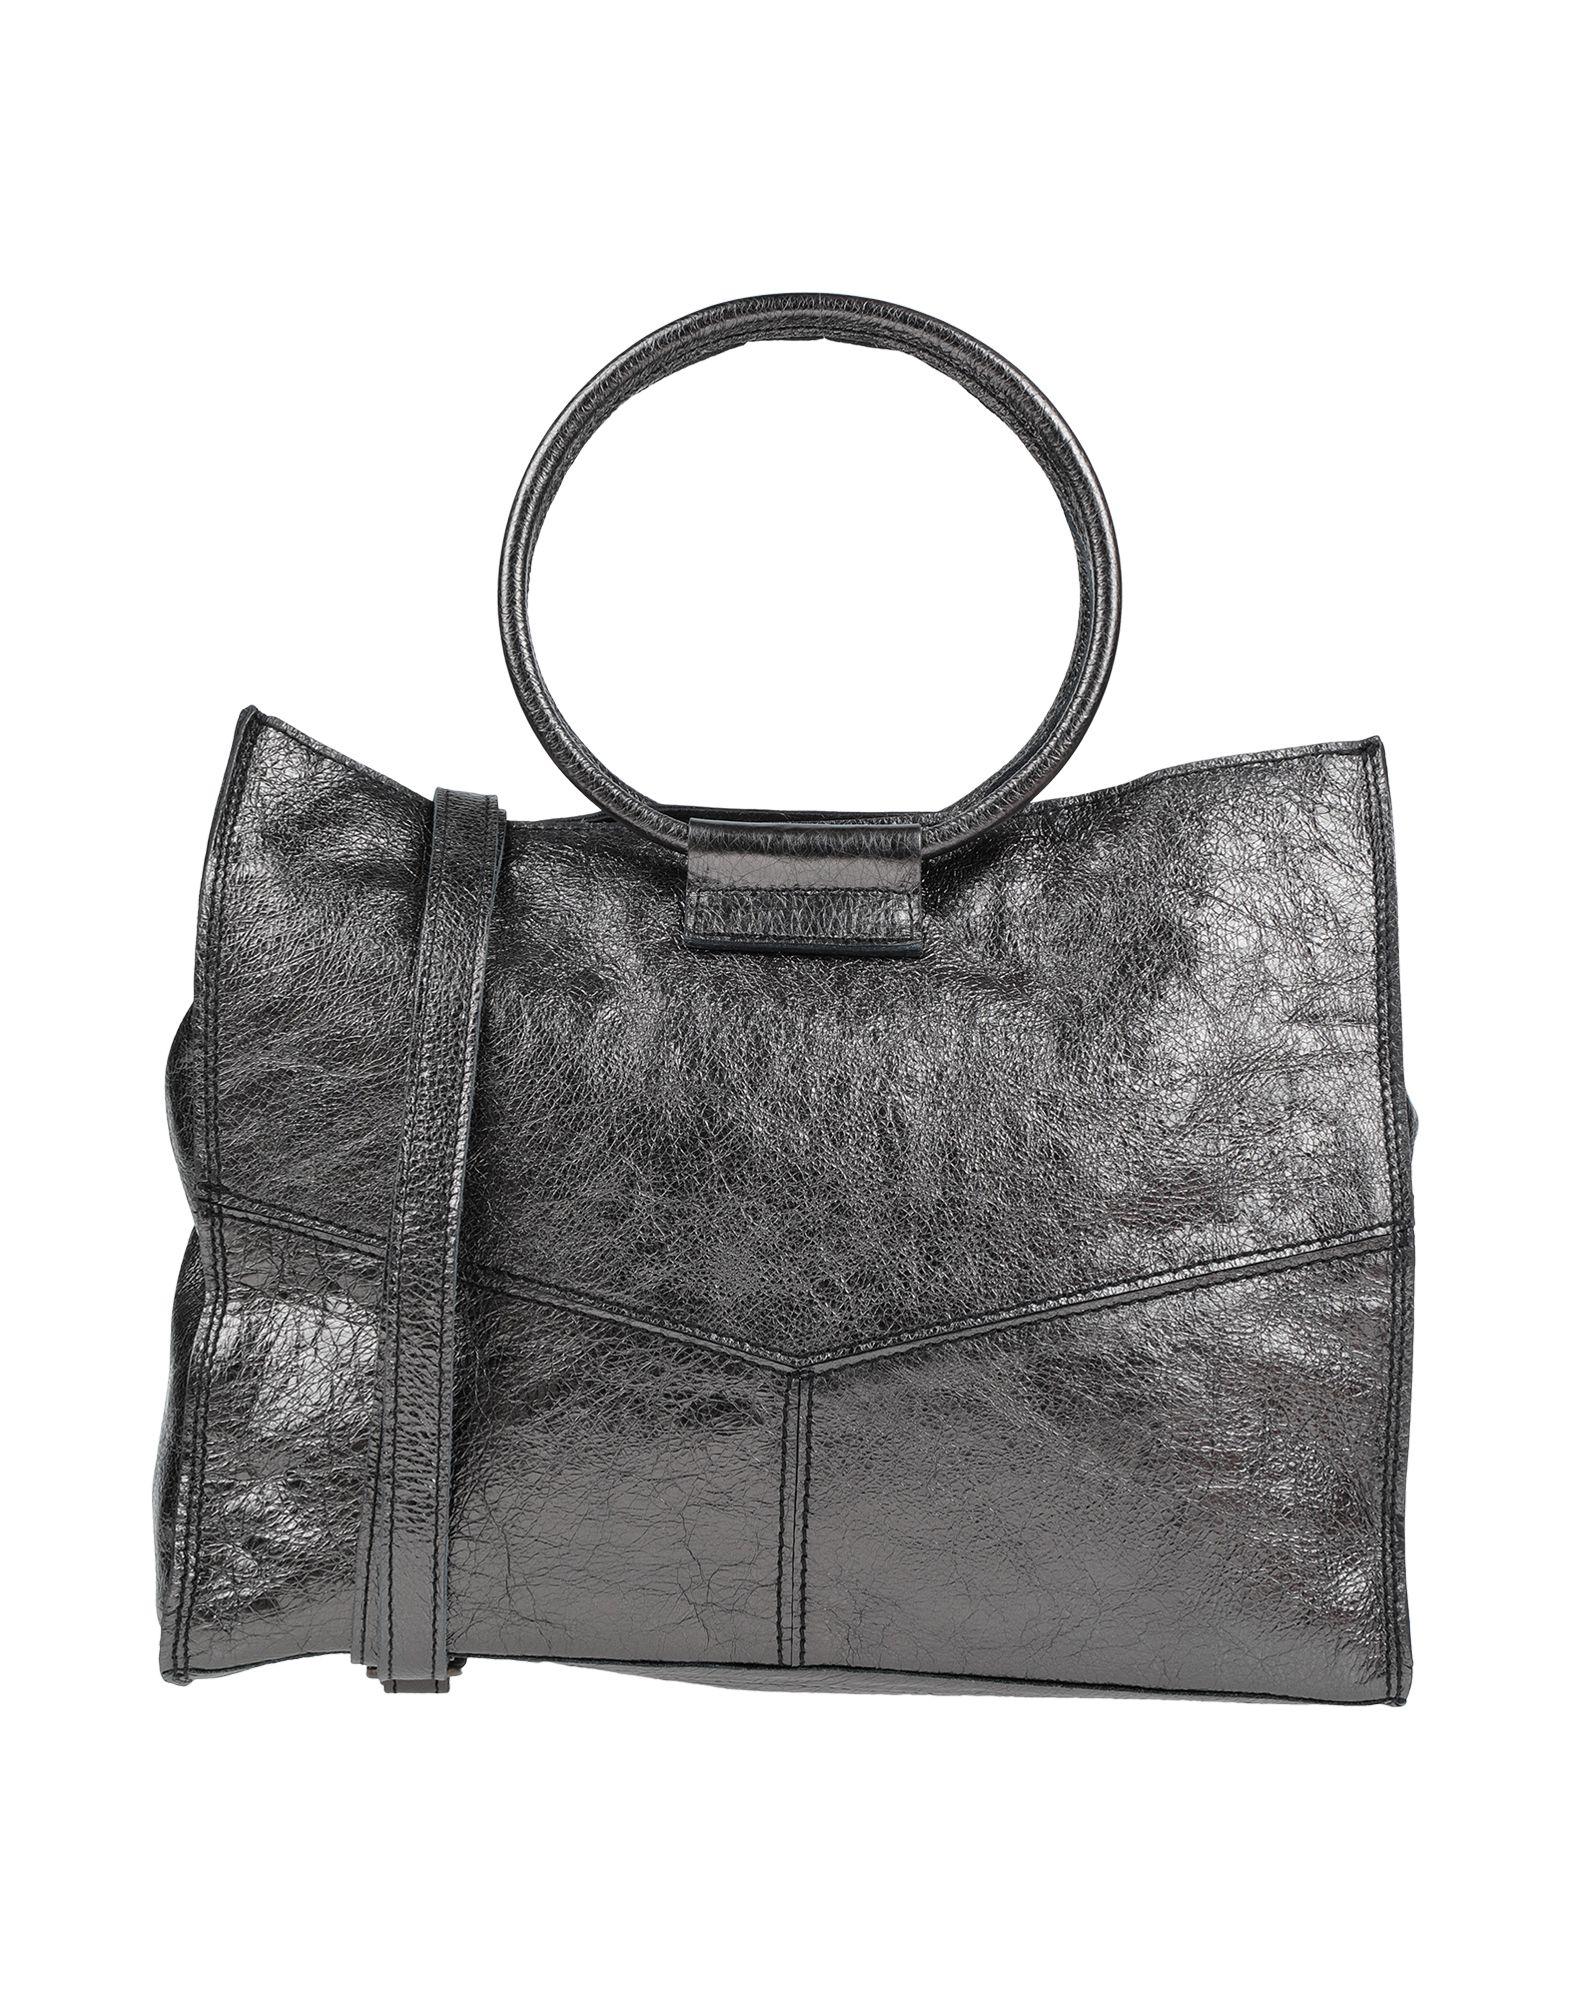 Caterina Lucchi Leather Handbag in Lead (Gray) - Lyst